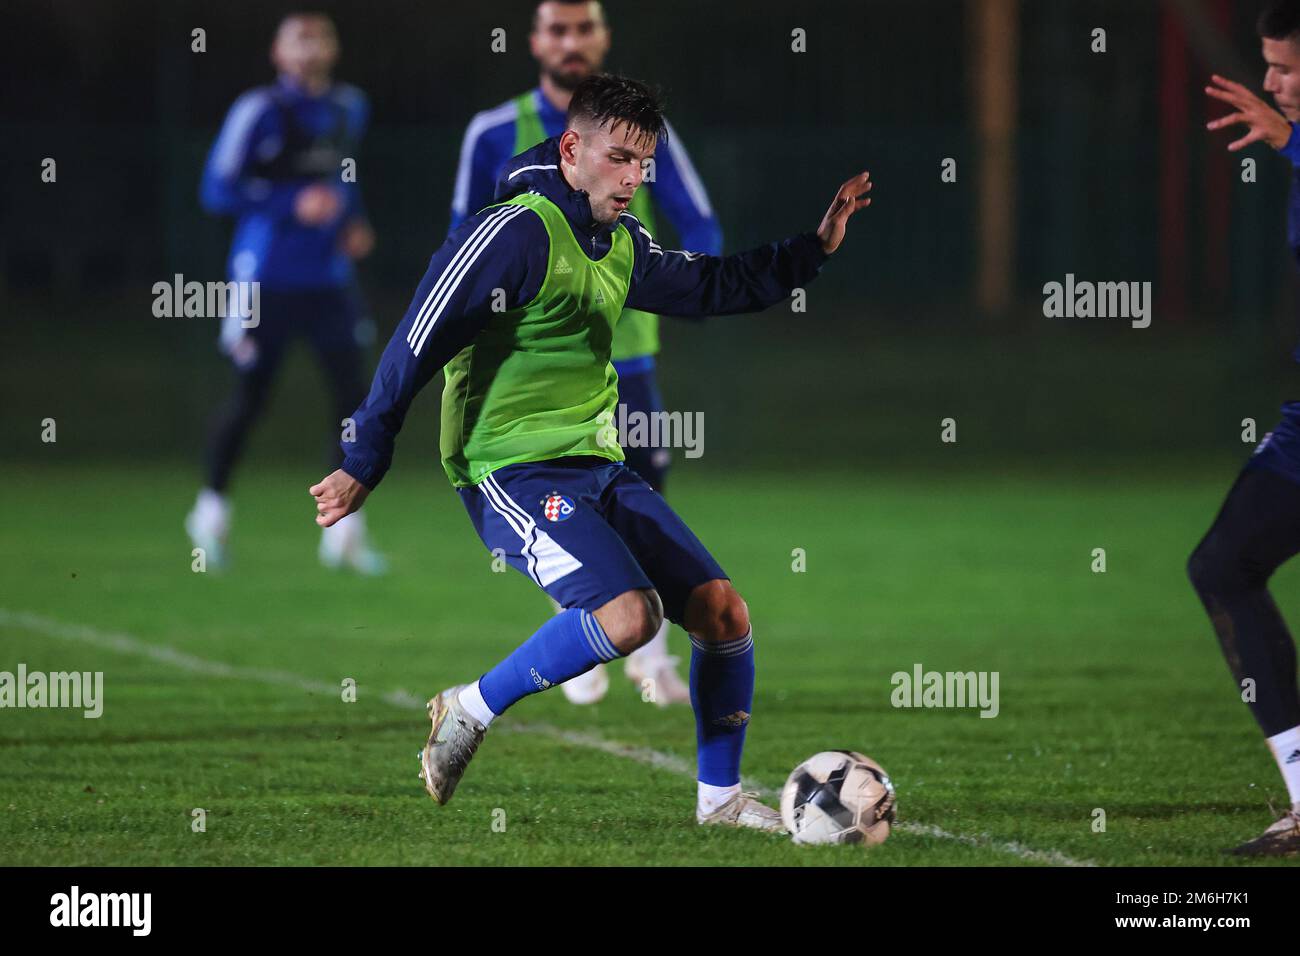 Daniel Stefulj at the evening training of GNK Dinamo in Rovinj, Croatia on January 3, 2023. The first team of GNK Dinamo is in Rovinj, where they are making final preparations for the second part of the 2022/23 season.  Photo: Luka Stanzl/PIXSELL Stock Photo